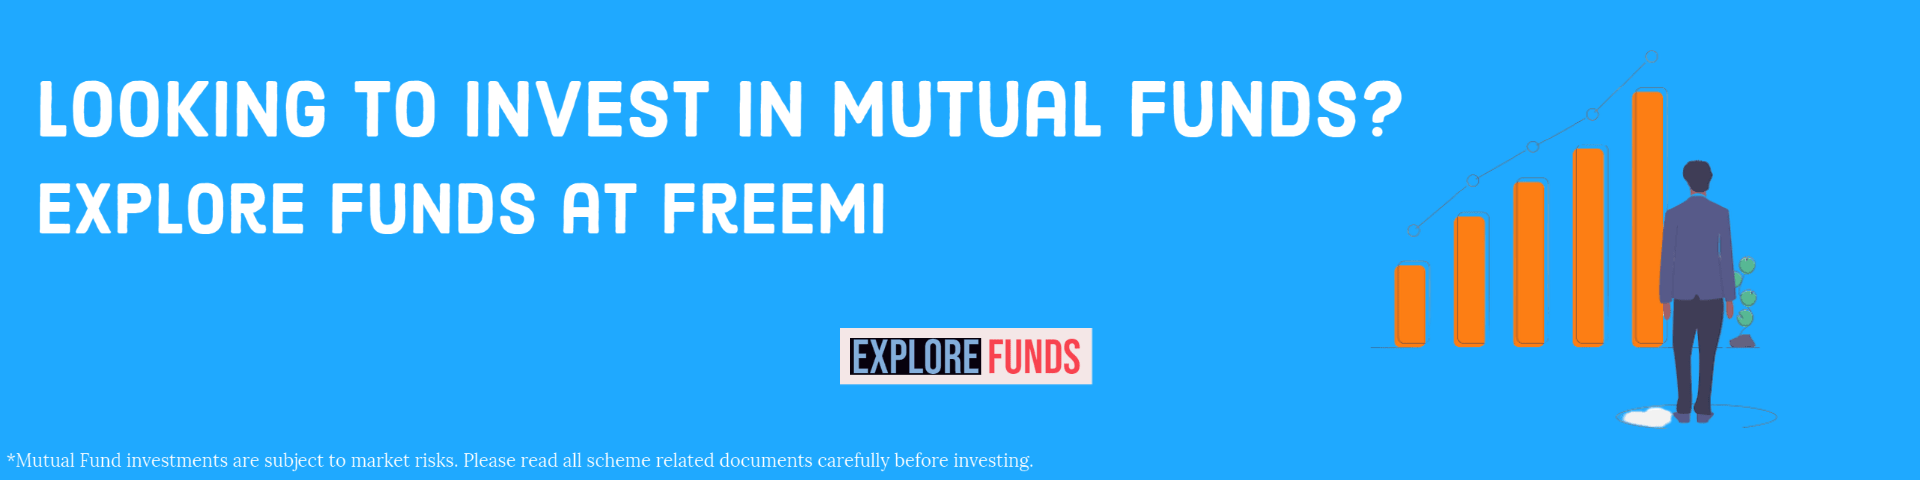 Mutual Funds Investments at FreEMI.im